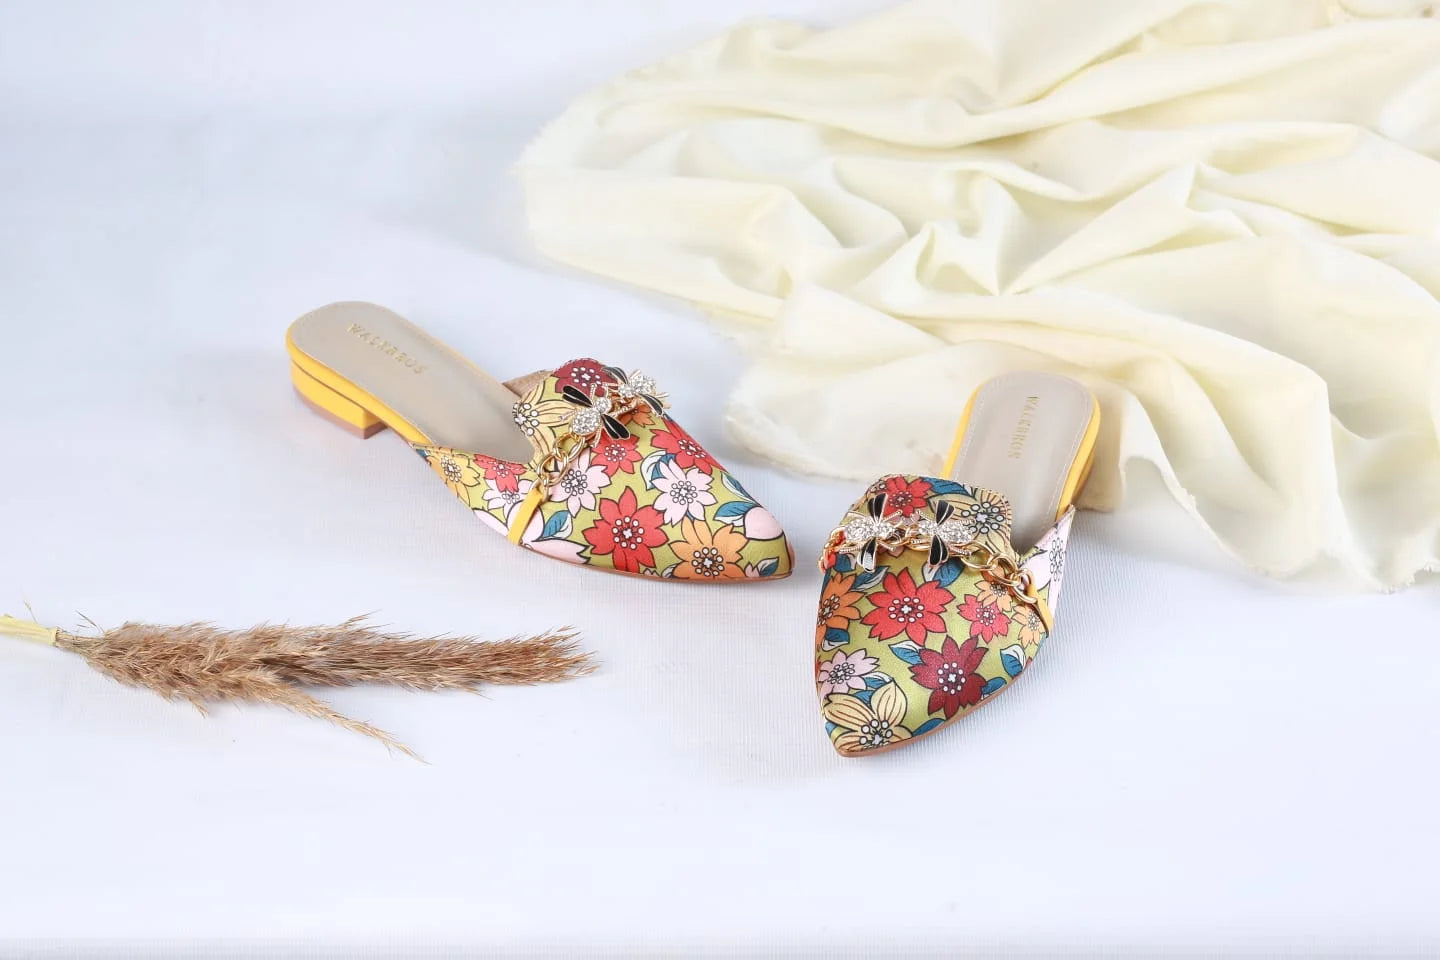 FLORAL MULE POINTED TOE FLATS VINTAGE BEE MULES - YELLOW